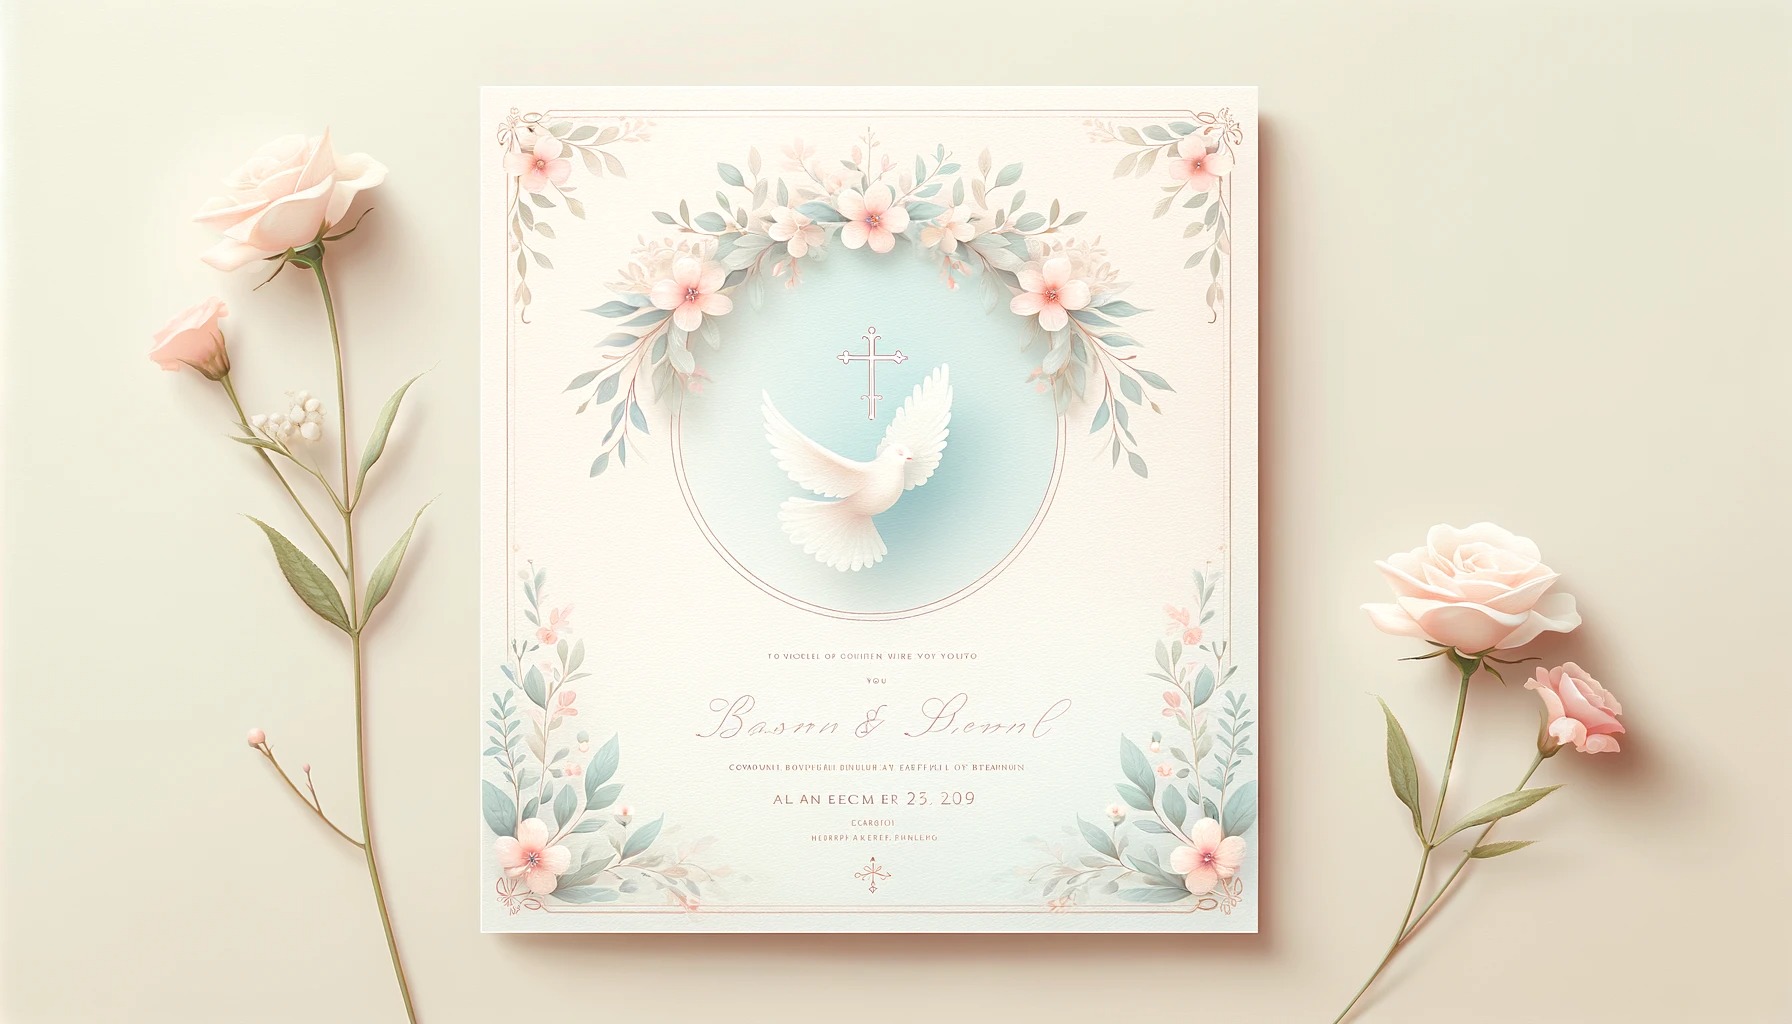 How To Make A Baptism Invitation Card